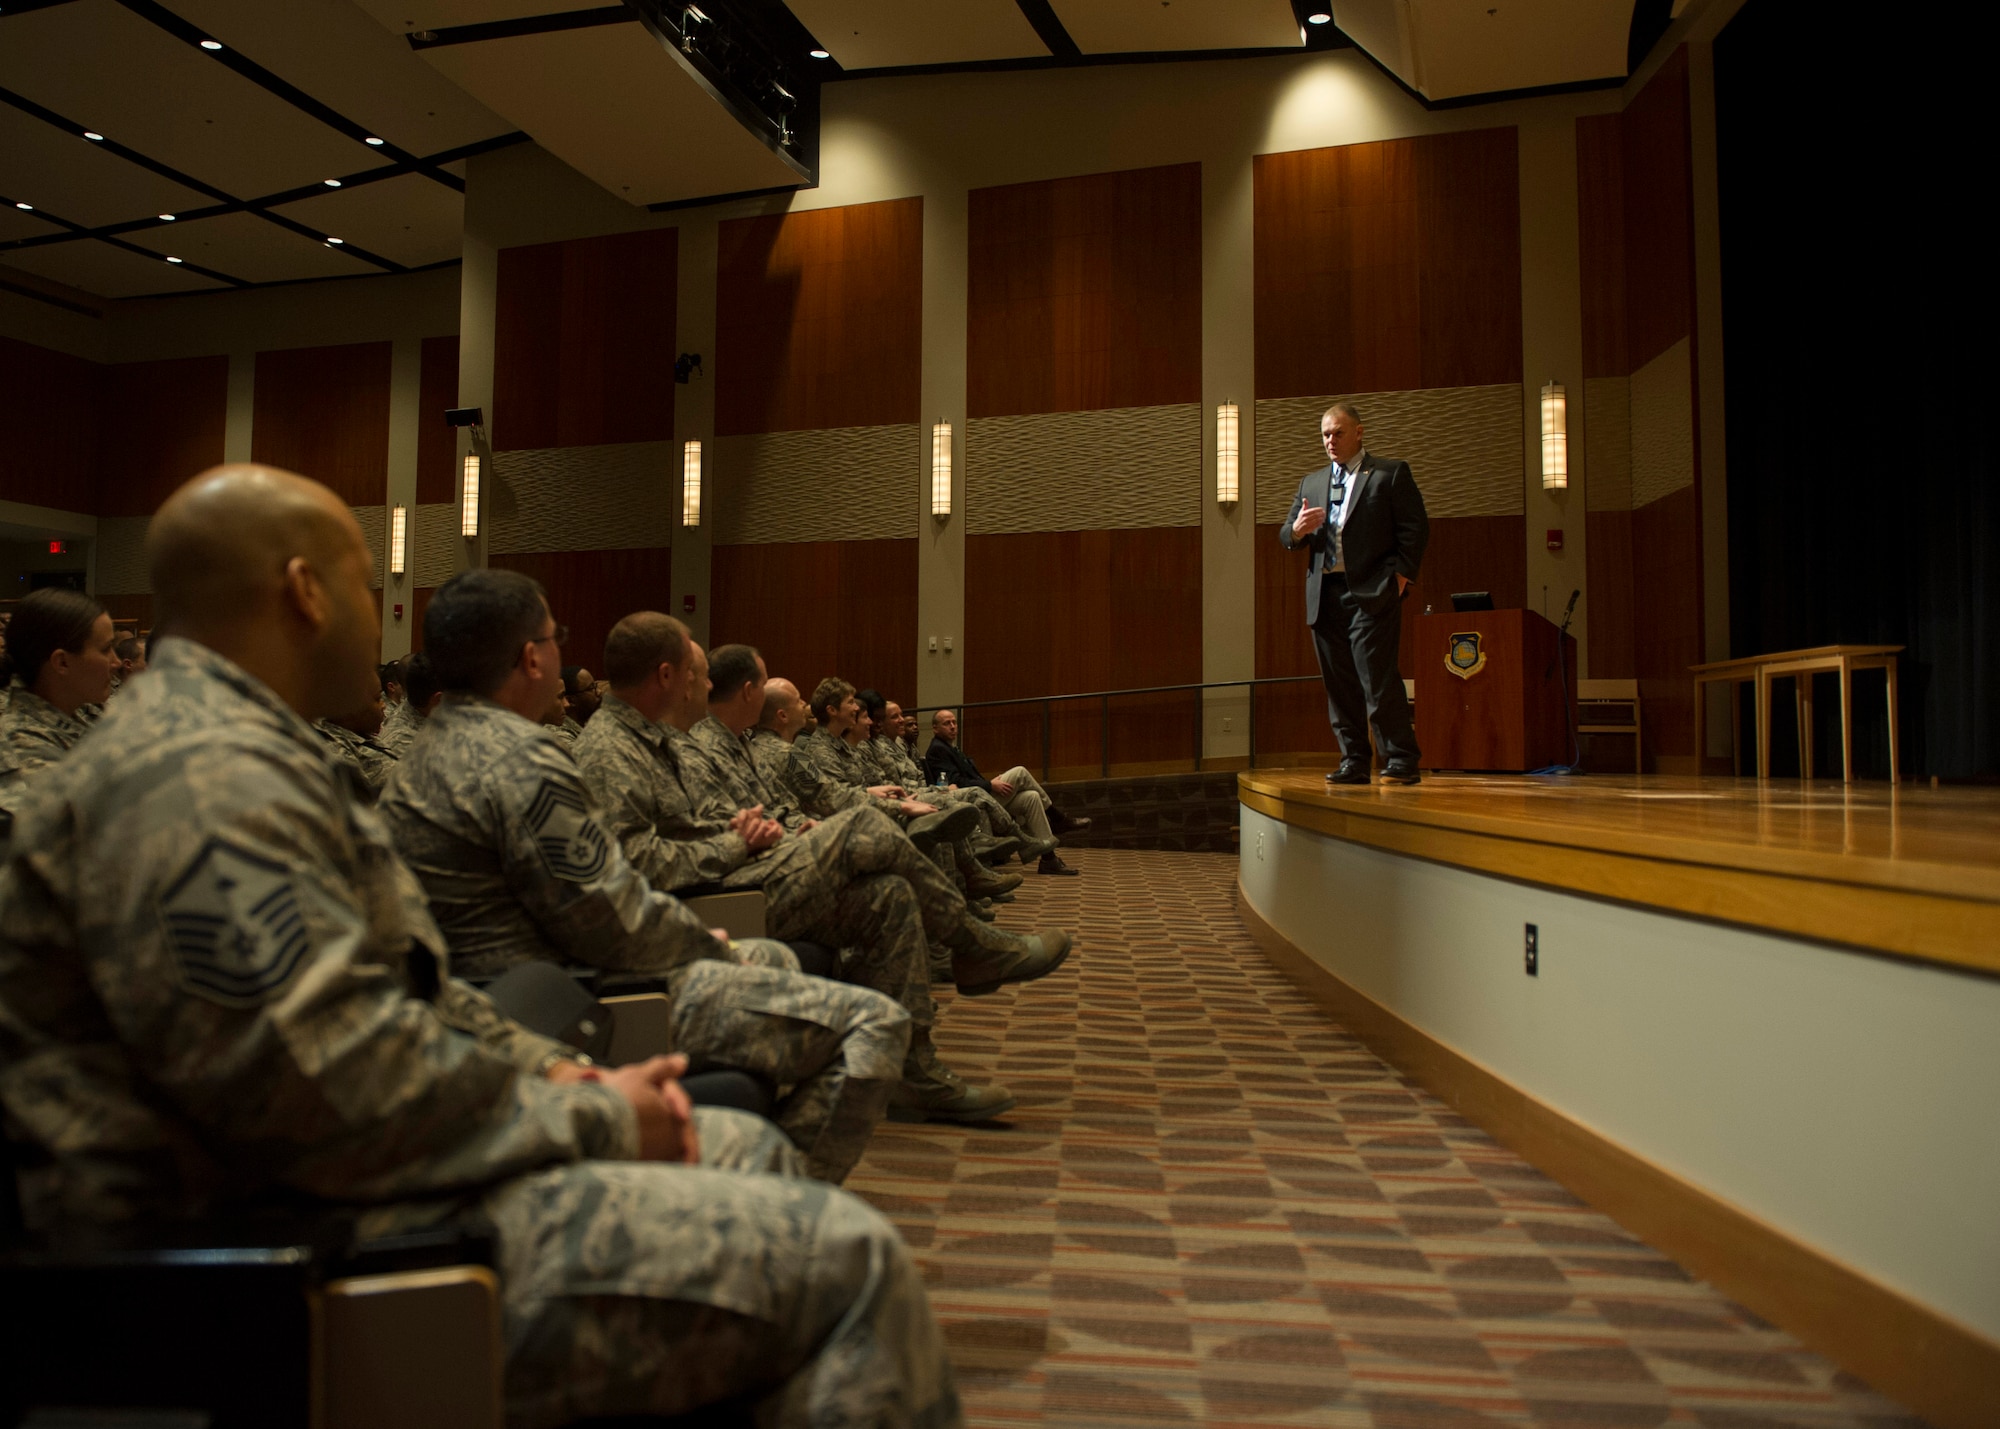 Retired Chief Master Sgt. of the Air Force James A. Roy speaks to employees of the National Air and Space Intelligence Center during his tour of Wright-Patterson Air Force Base, Ohio, Friday, Jan. 29, 2016. Roy served as the 16th Chief Master Sergeant of the Air Force. (U.S. Air Force photo by Senior Airman Justyn Freeman)